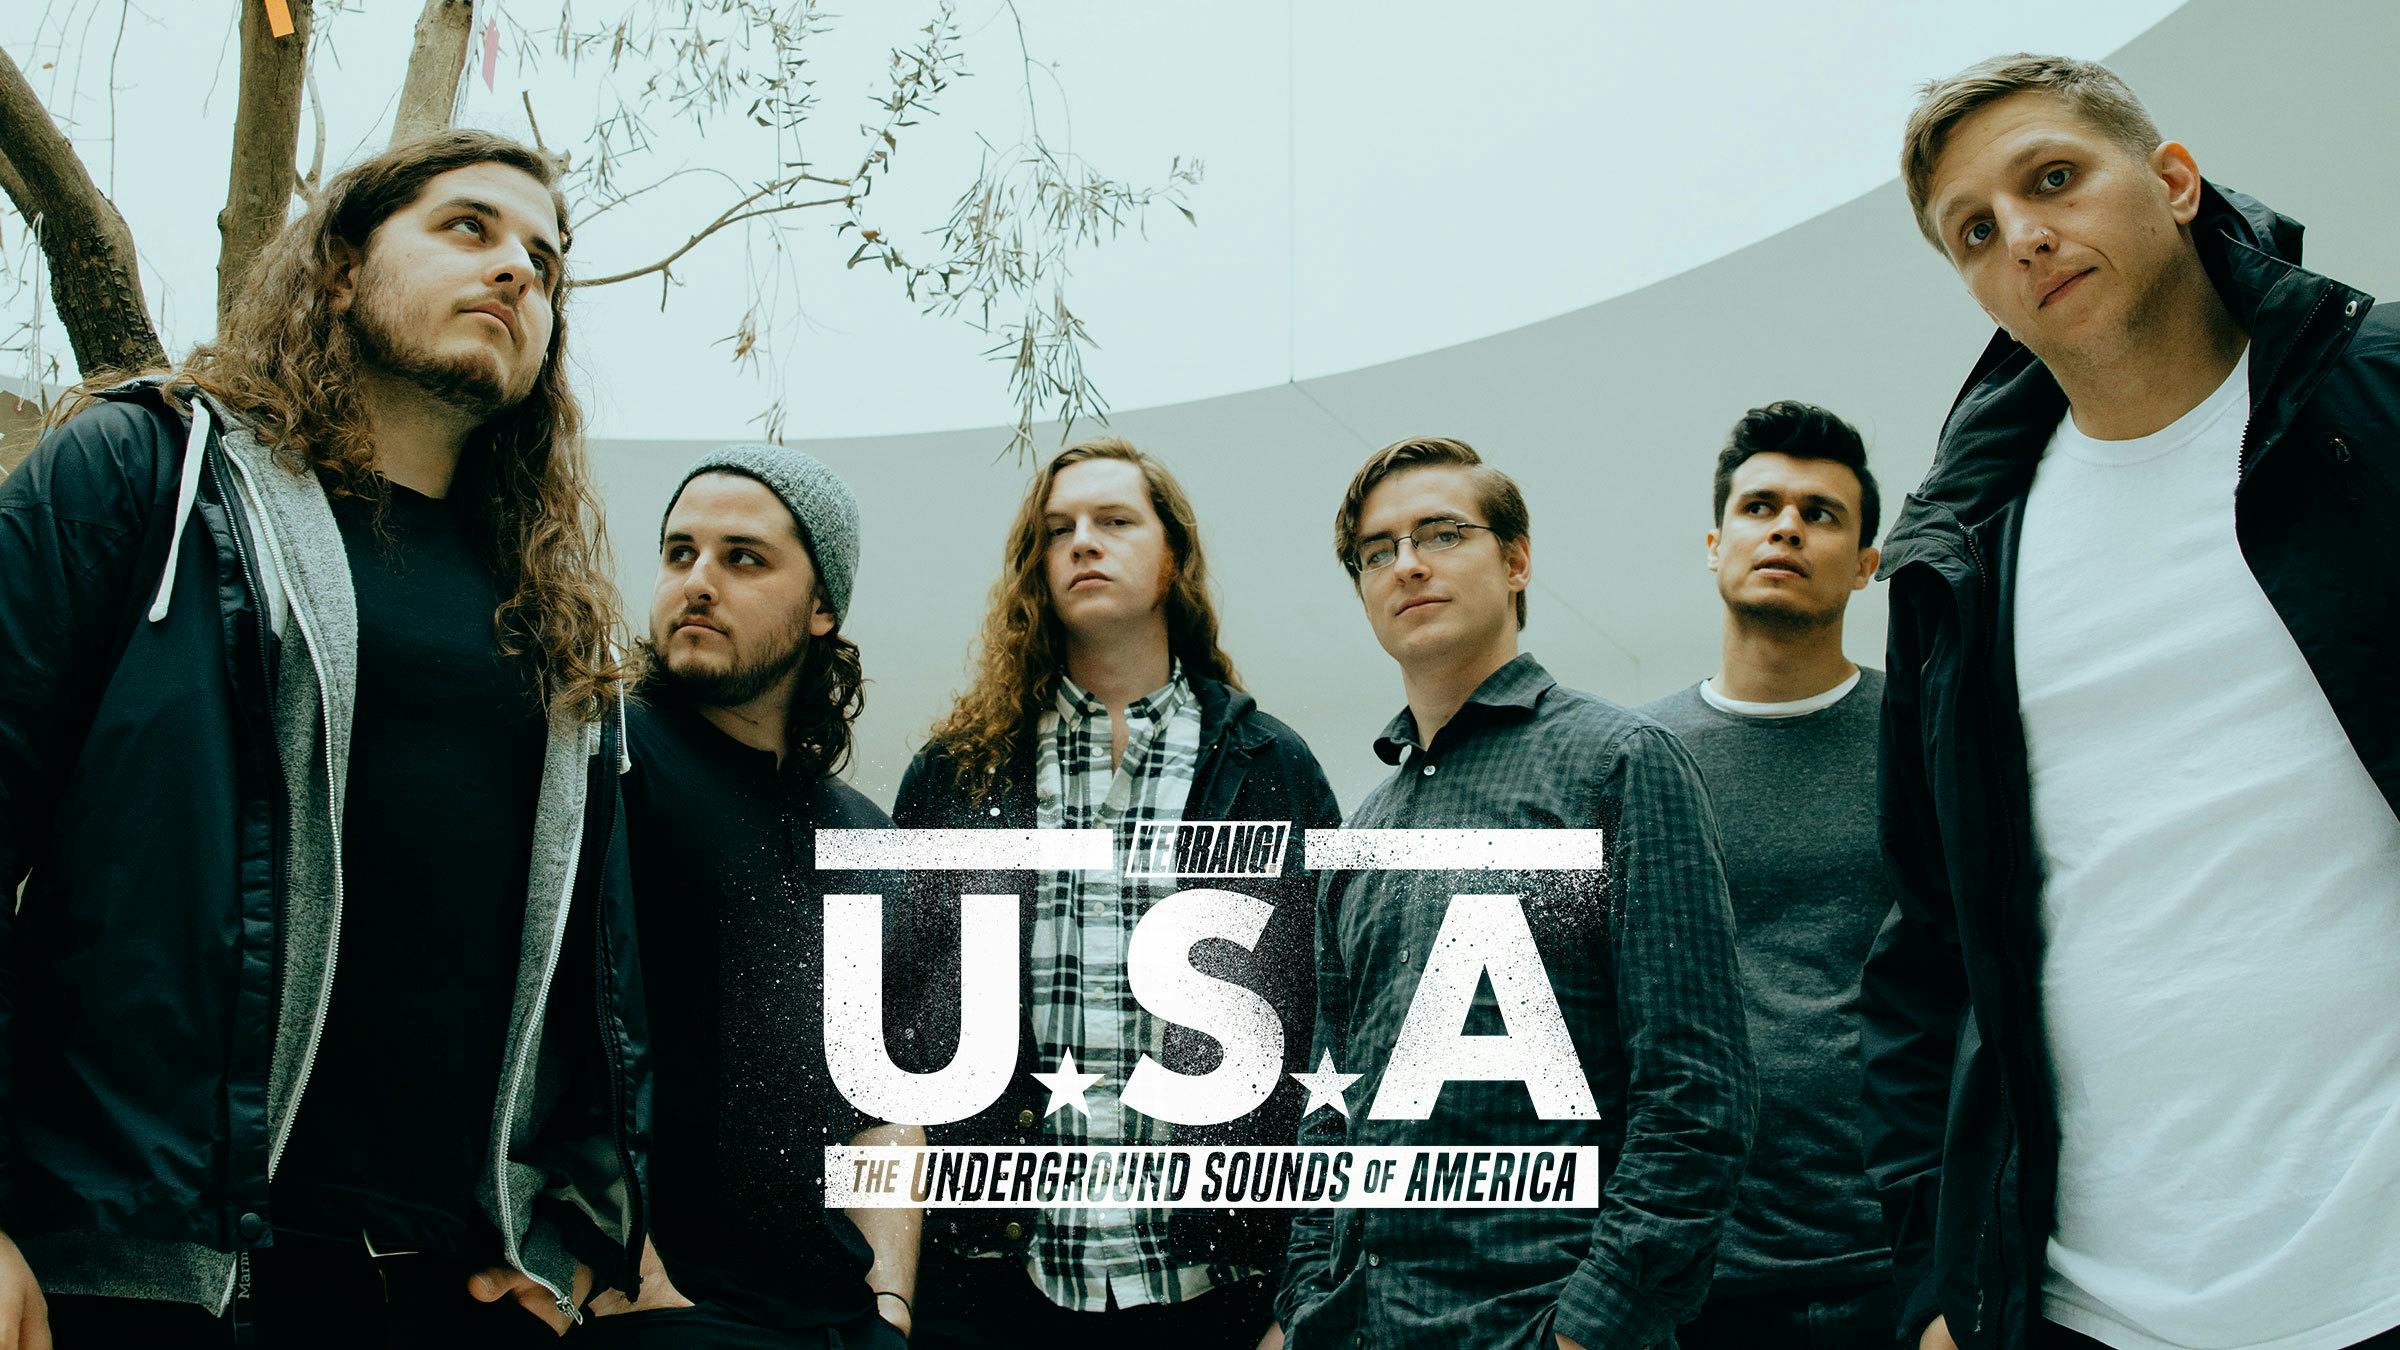 The Underground Sounds Of America: The Contortionist